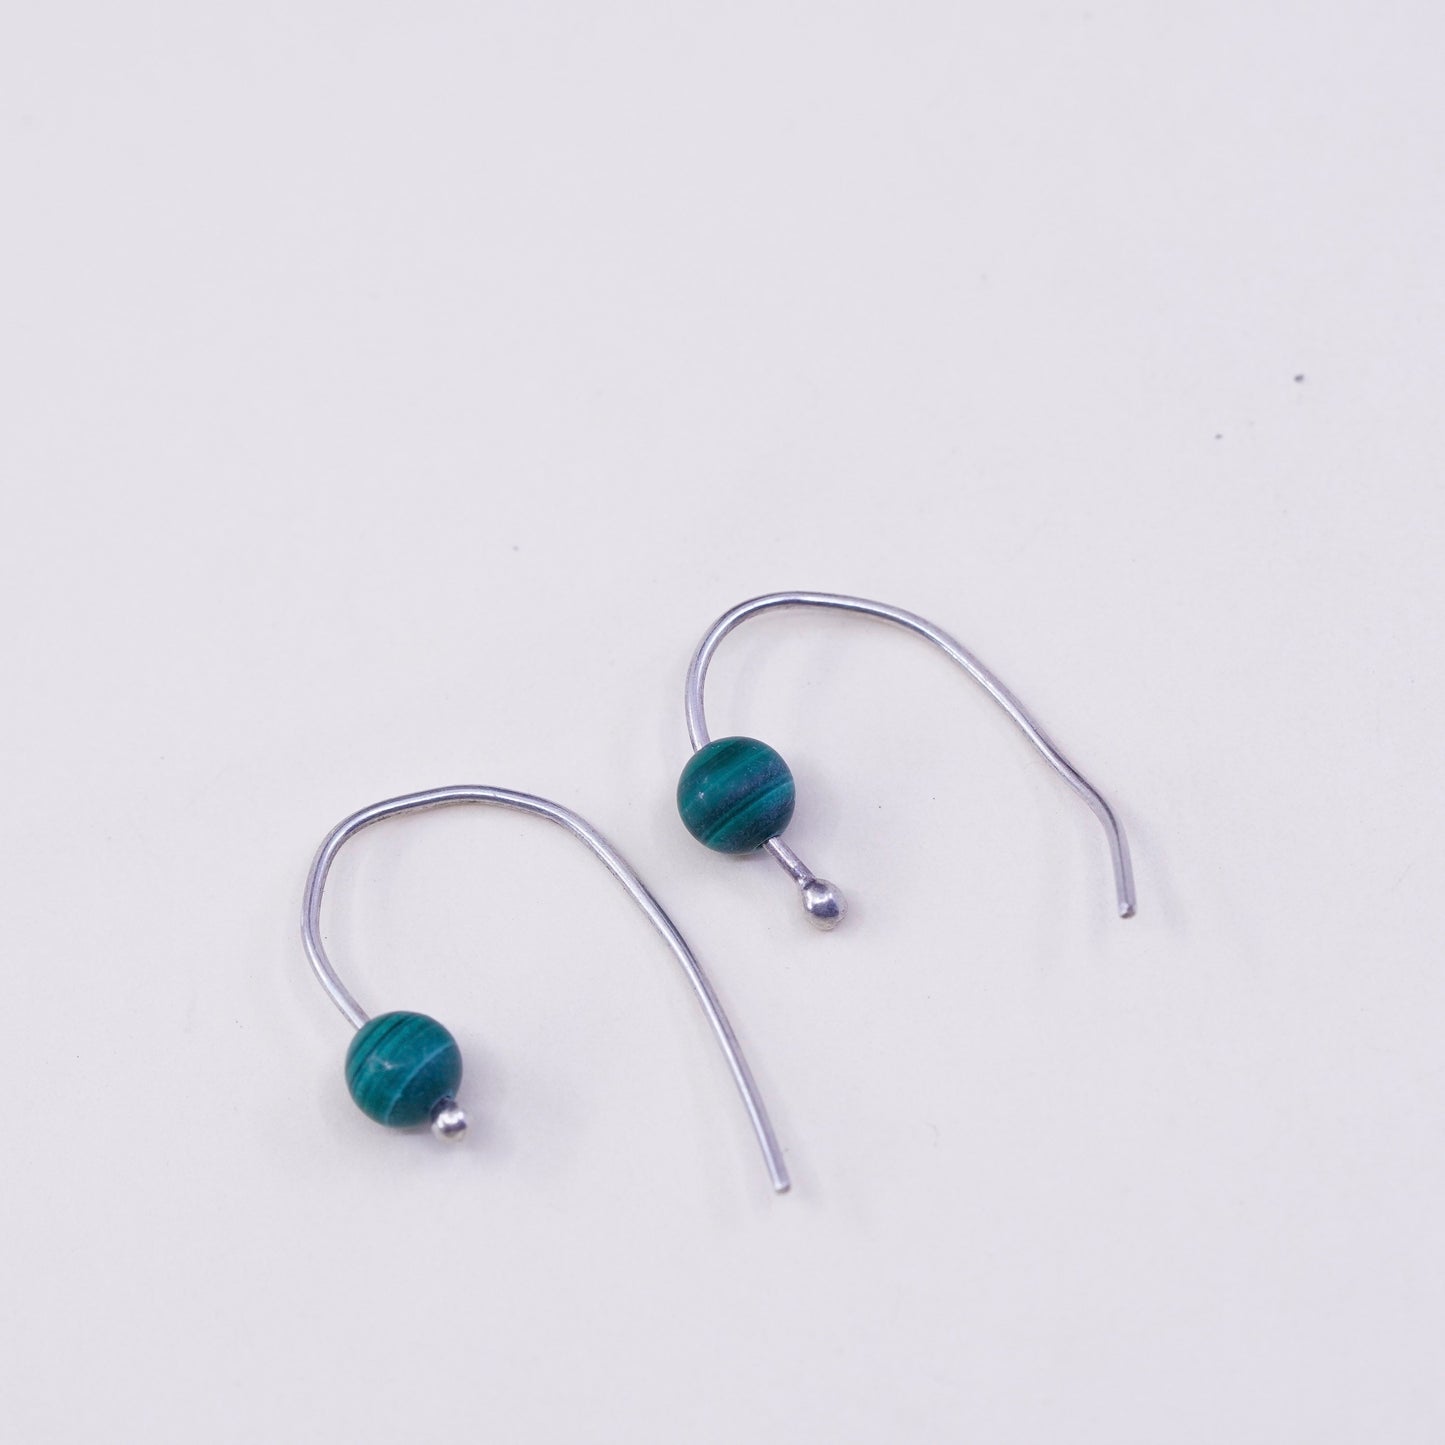 Vintage Sterling 925 silver handmade earrings with malachite bead, silver tested